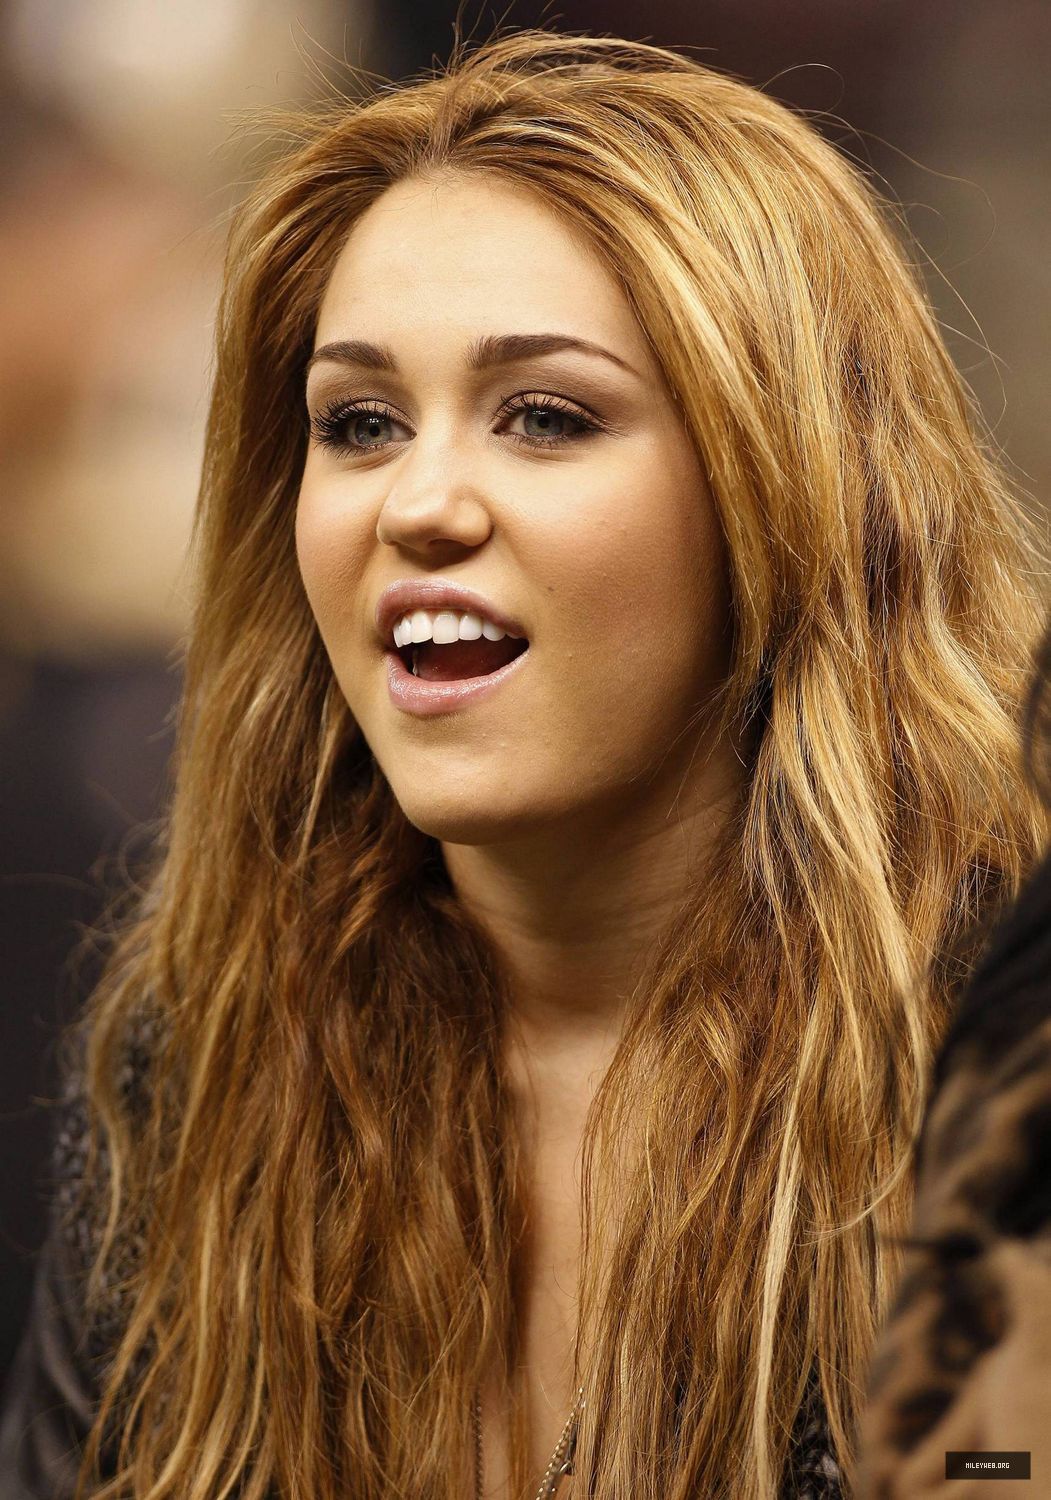 Miley at a New Orleans Saints Football Game on December 12,2010